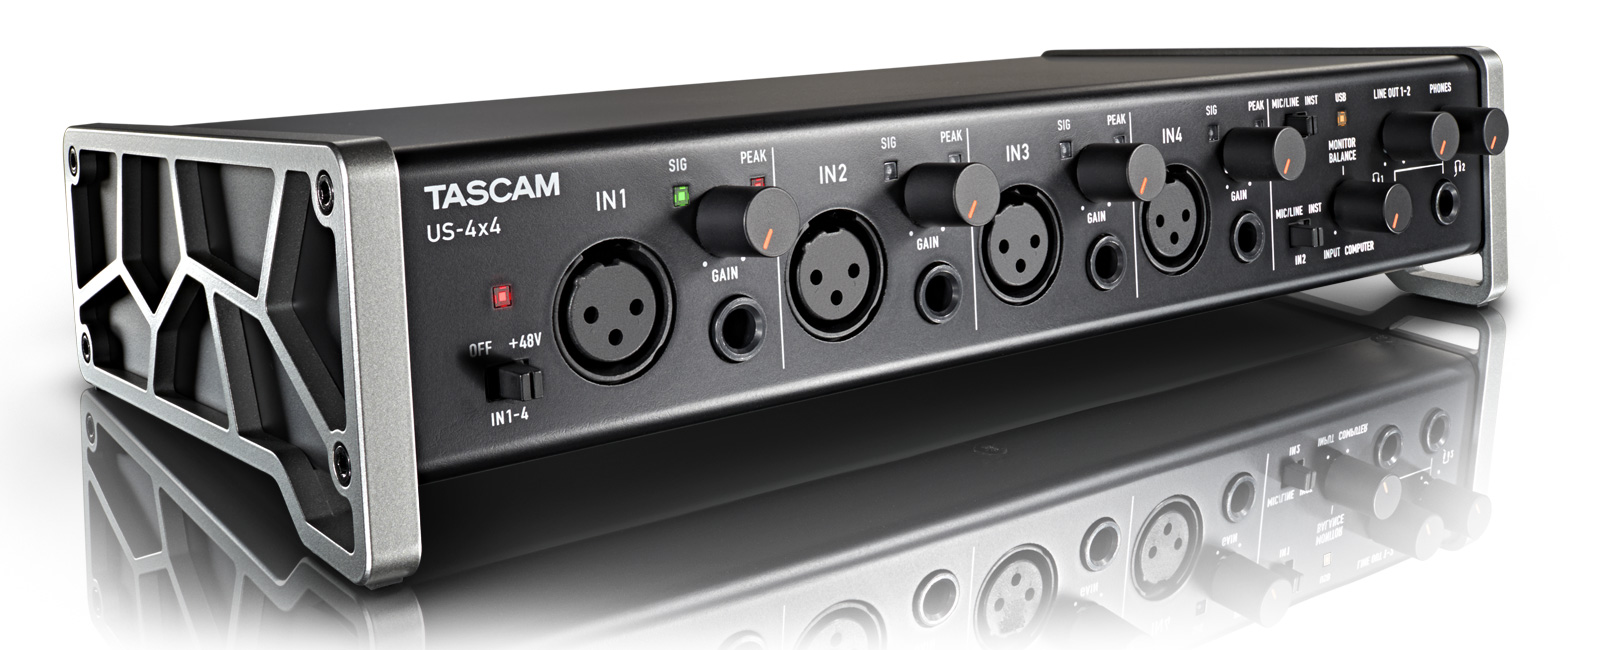 US-4x4 | OVERVIEW | TASCAM - United States